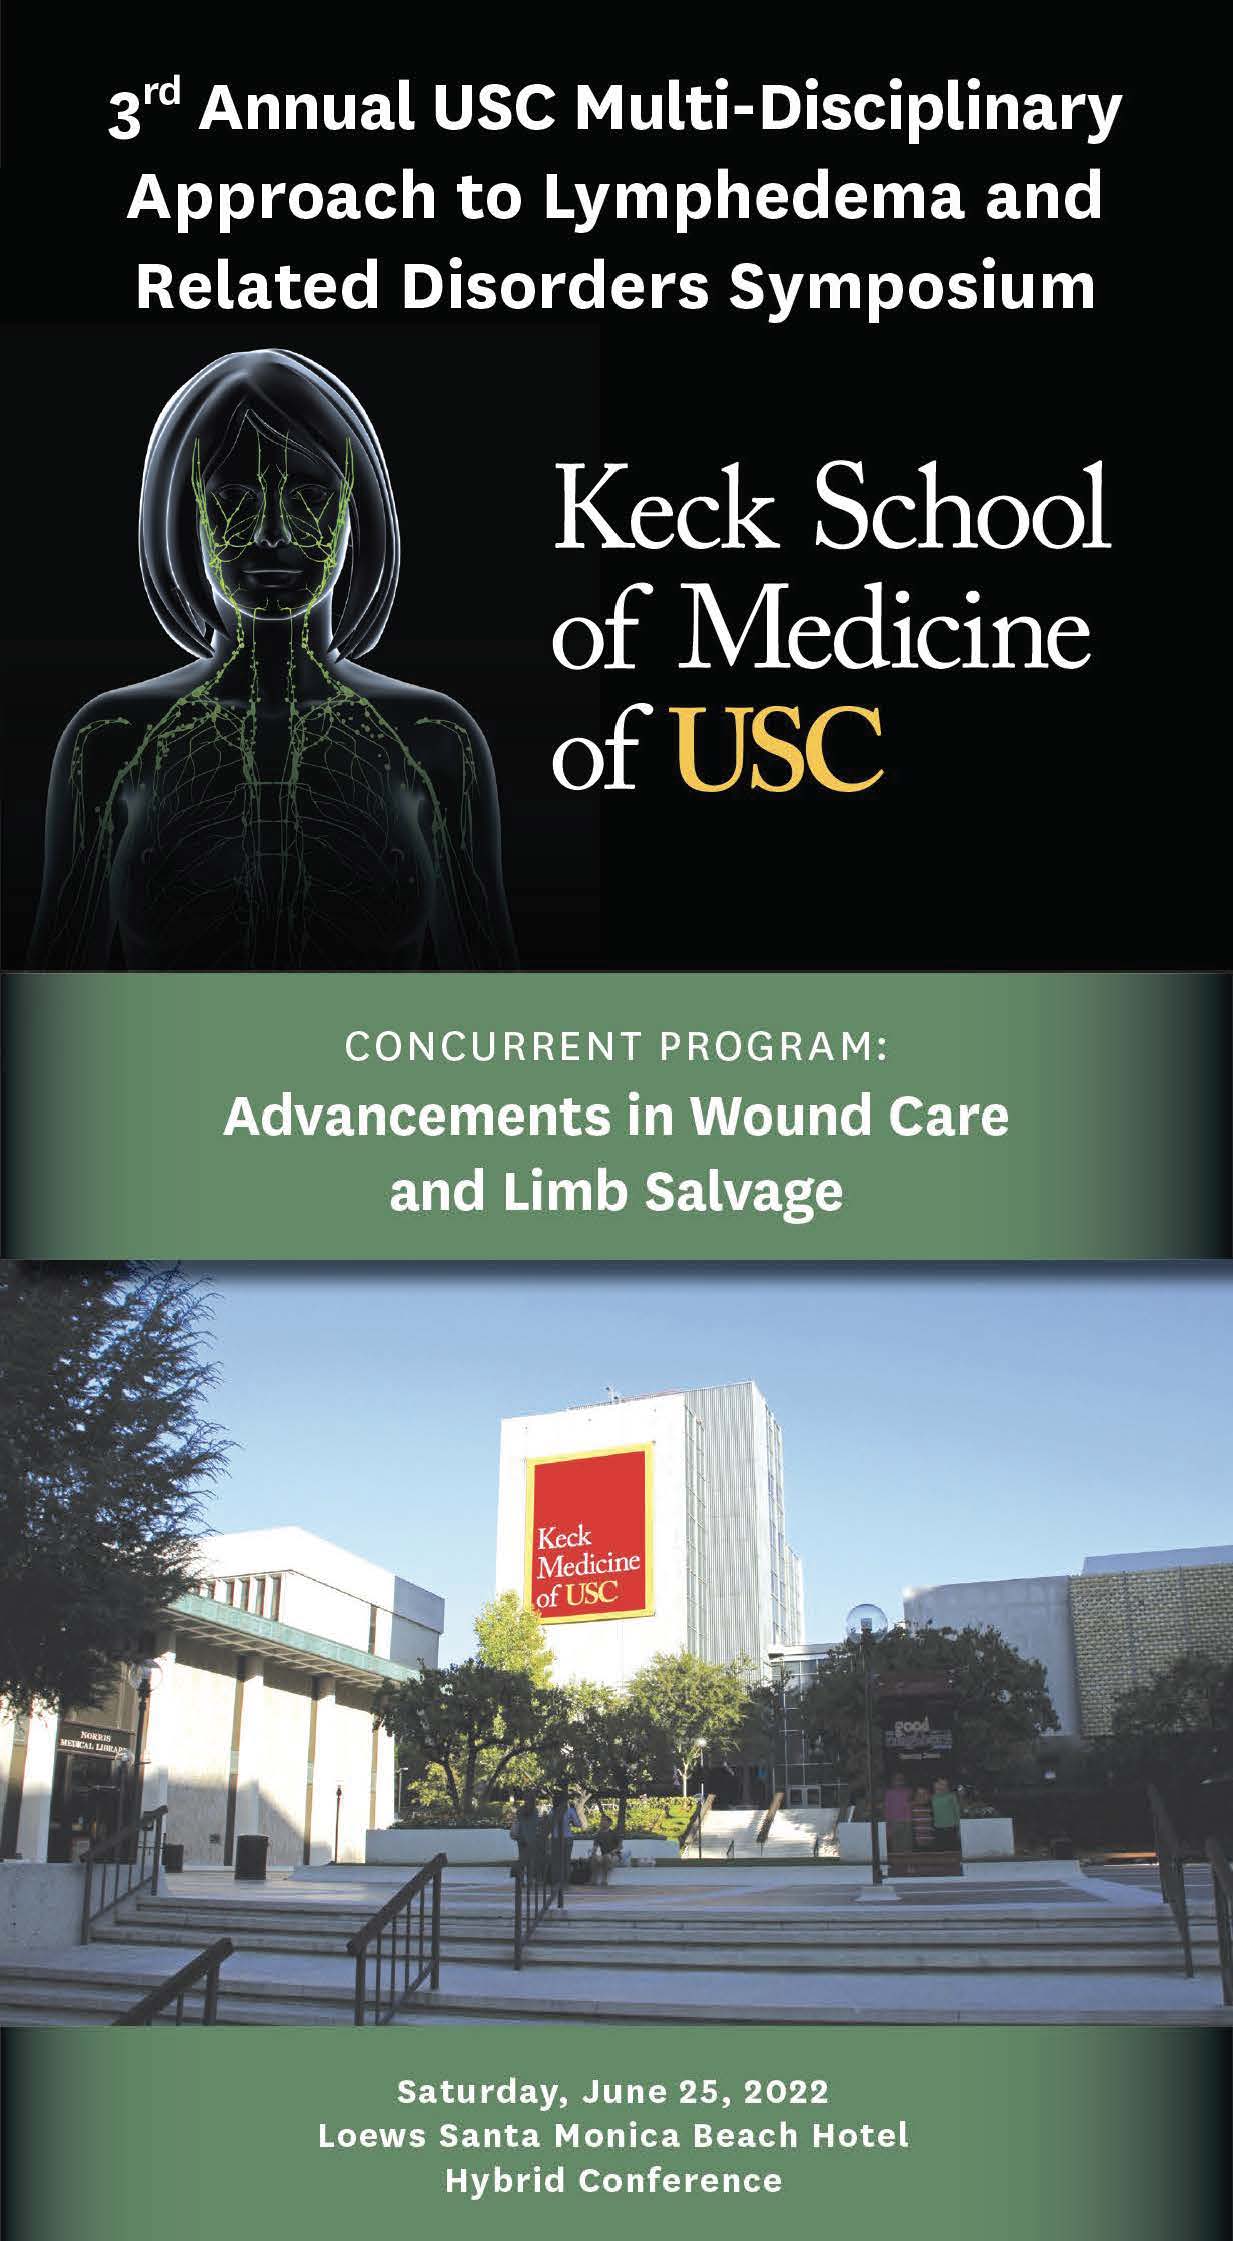 3rd Annual USC Multi-Disciplinary Approach to Lymphedema Symposium Banner